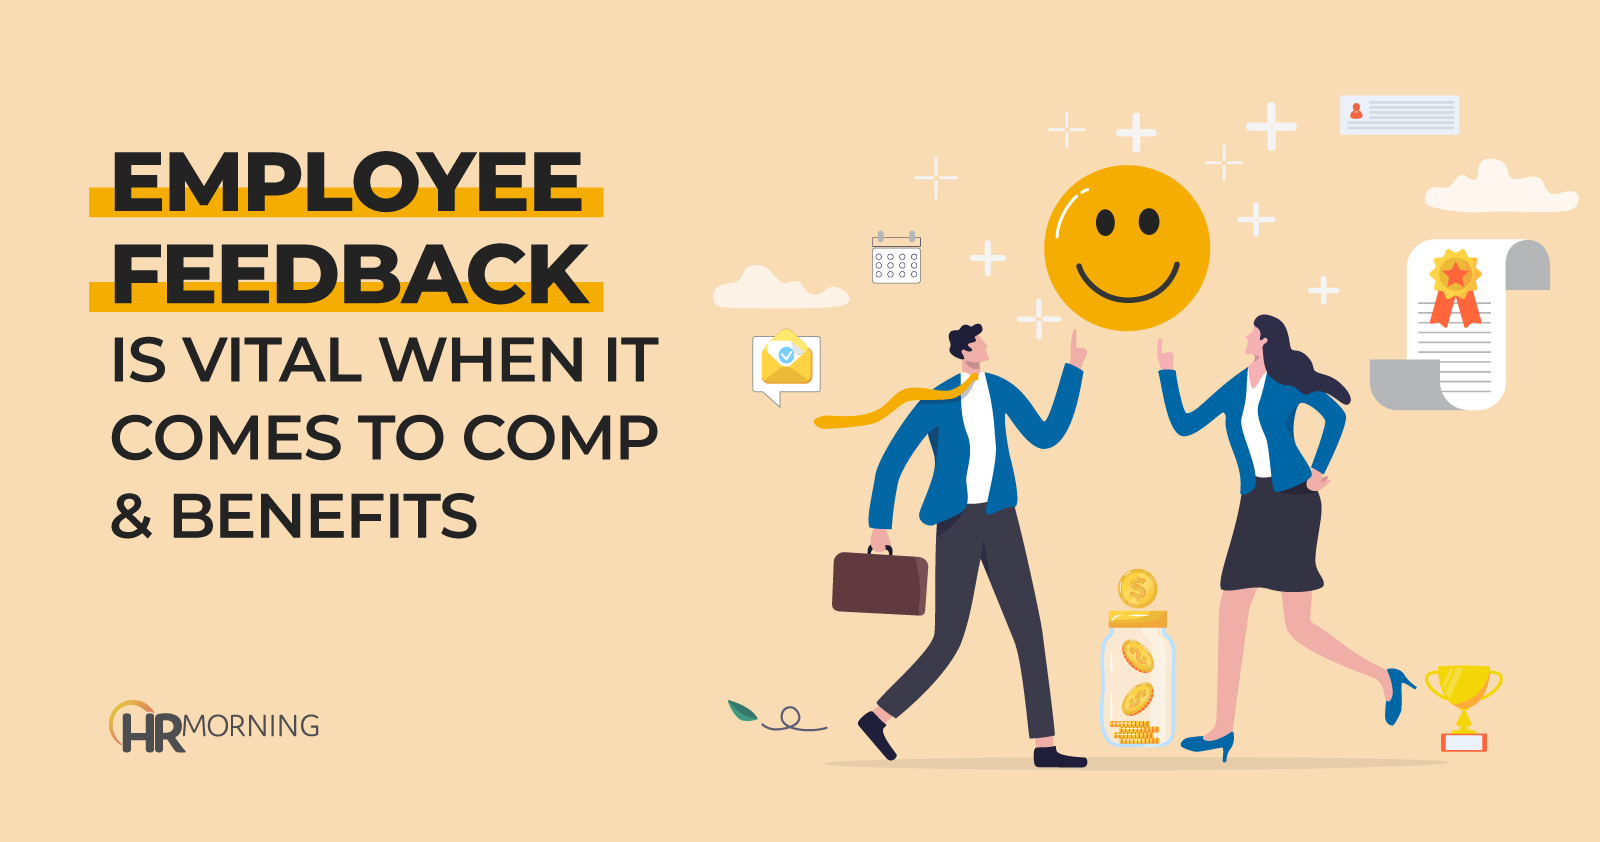 Employee feedback is vital when it comes to comp & benefits